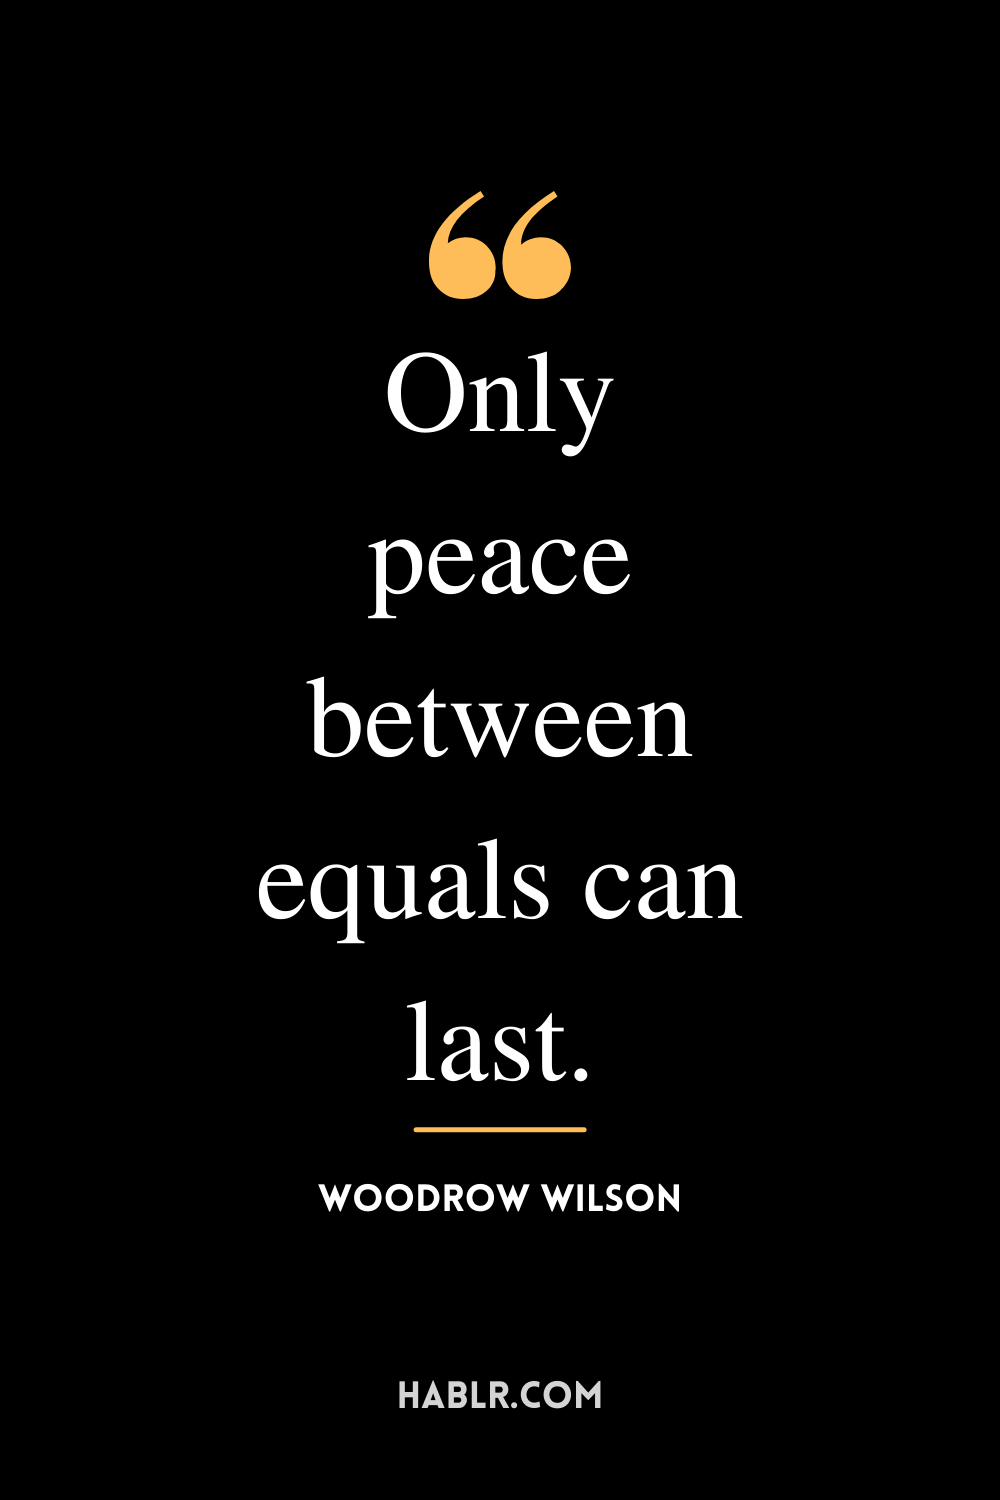 “Only peace between equals can last.” -Woodrow Wilson